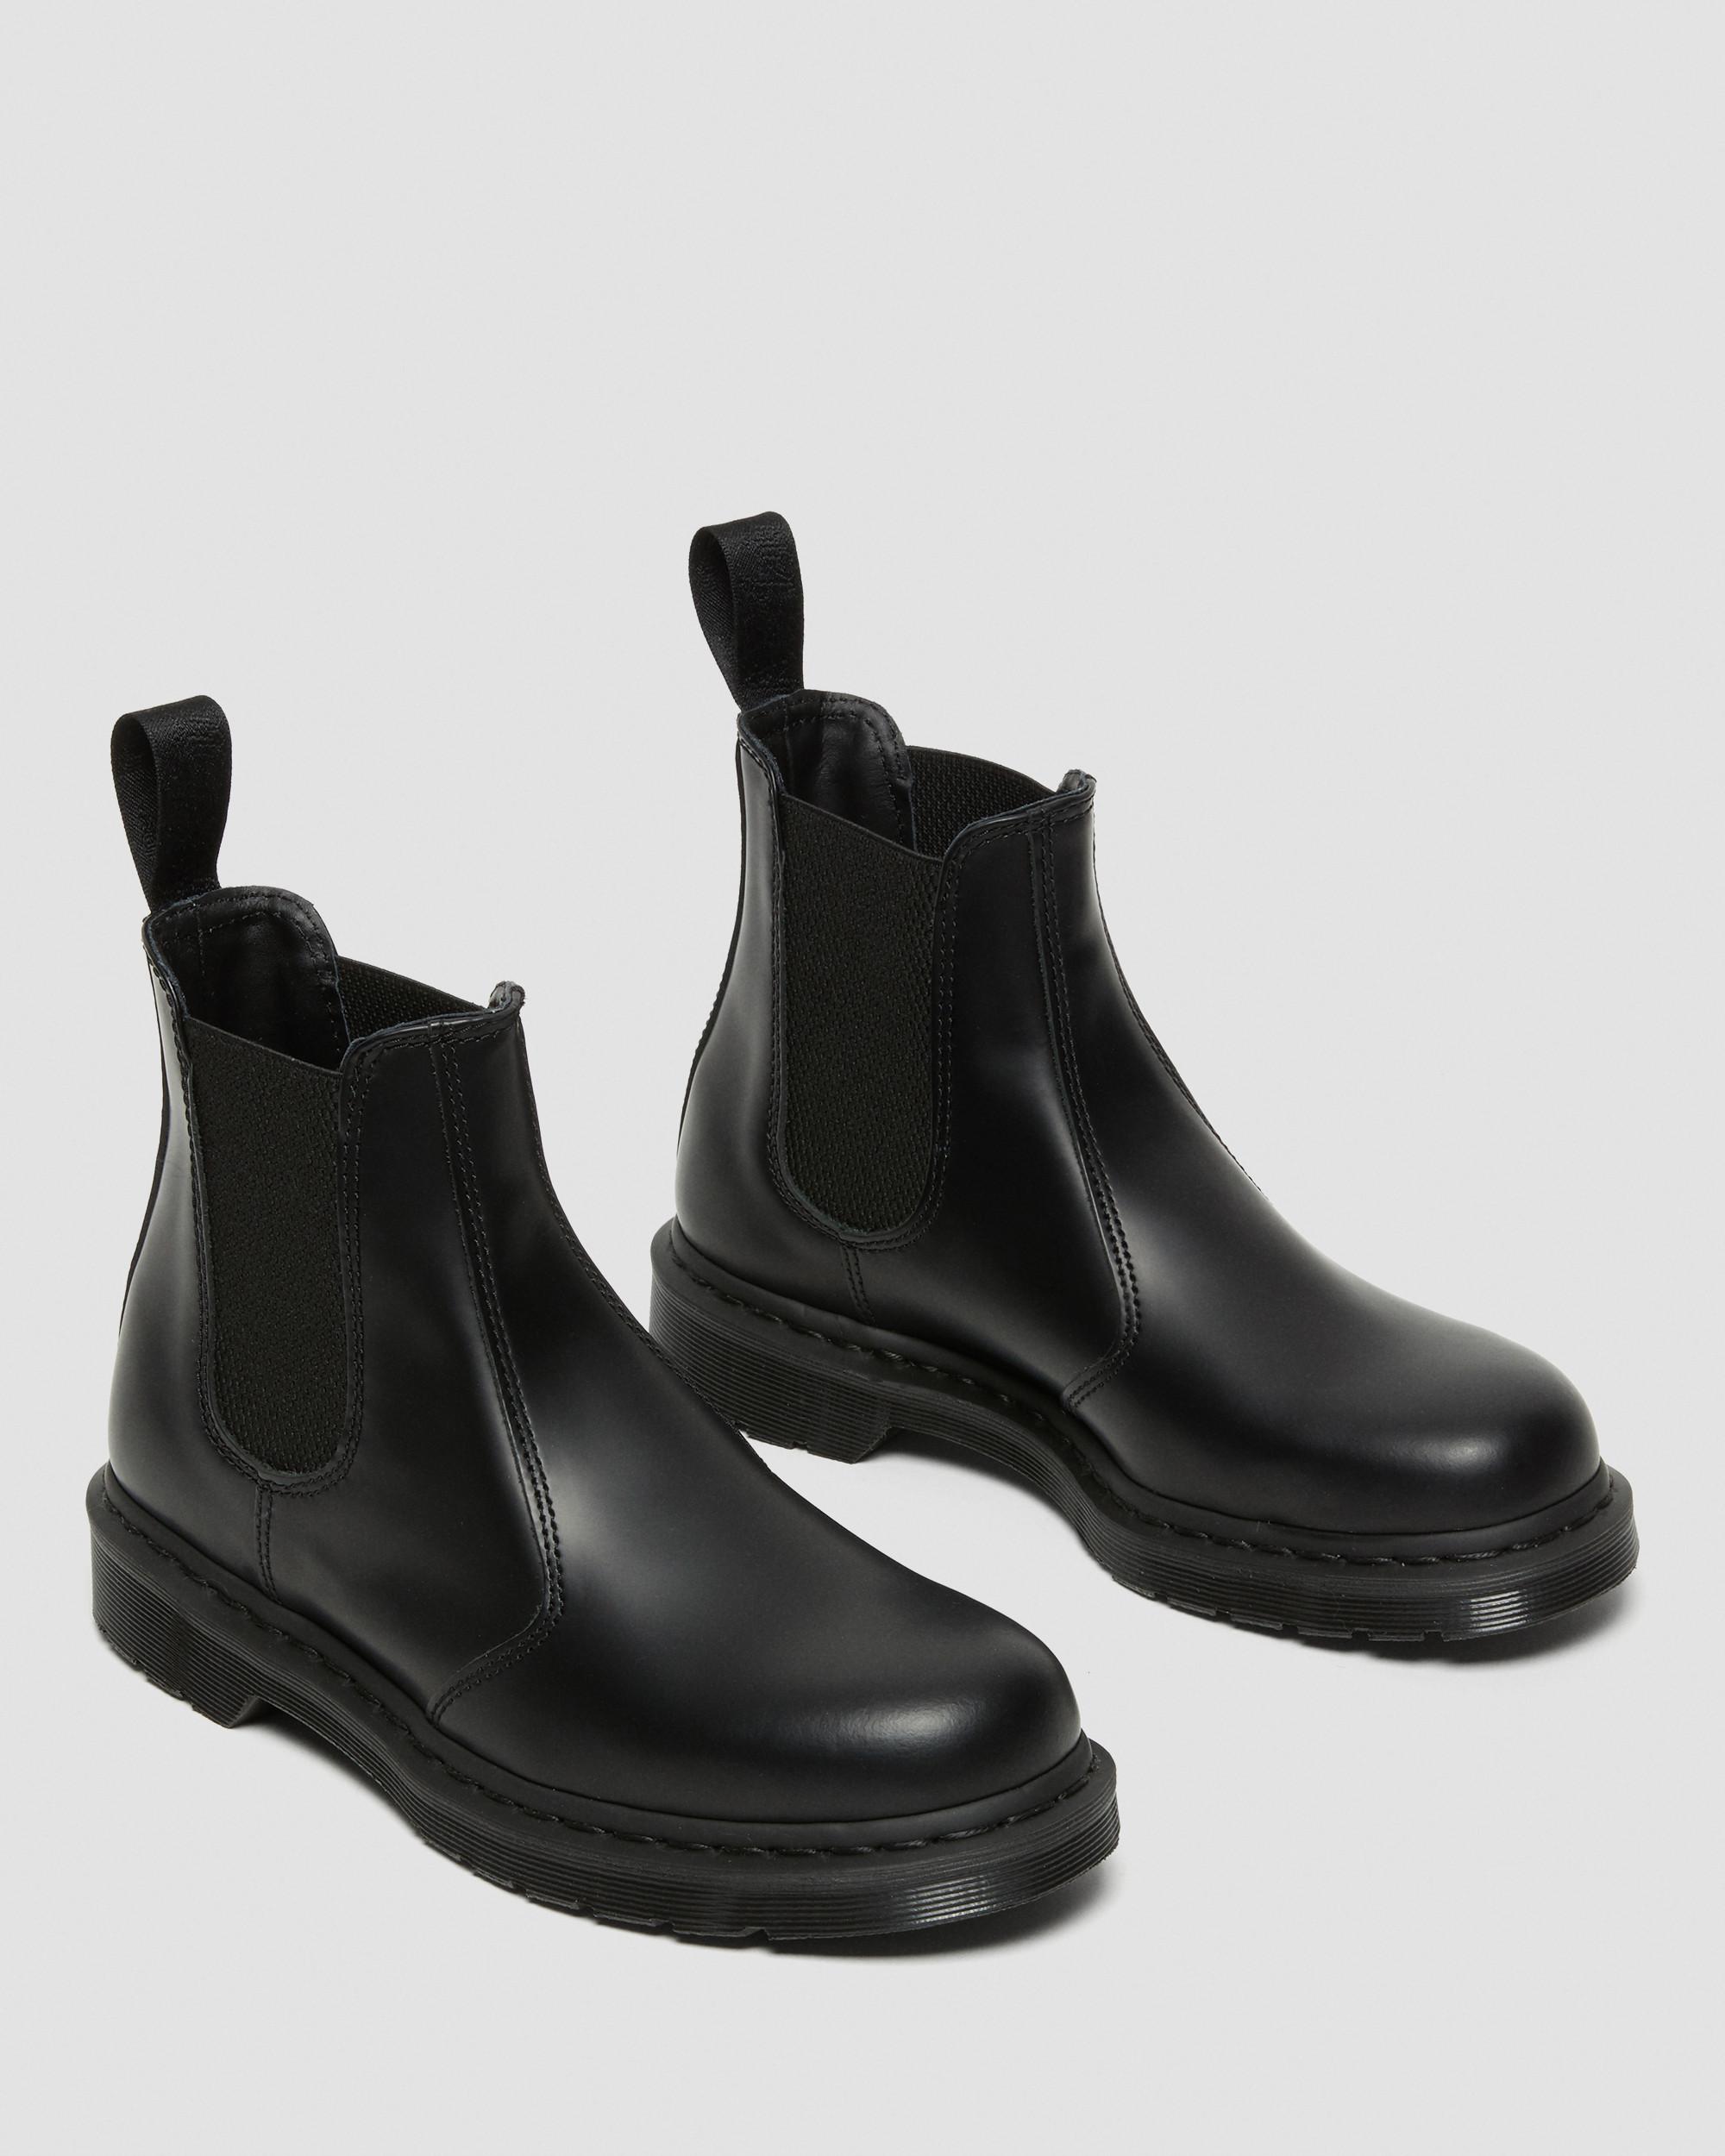 vulkansk tragedie mindre 2976 Mono Smooth Leather Chelsea Boots | Dr. Martens